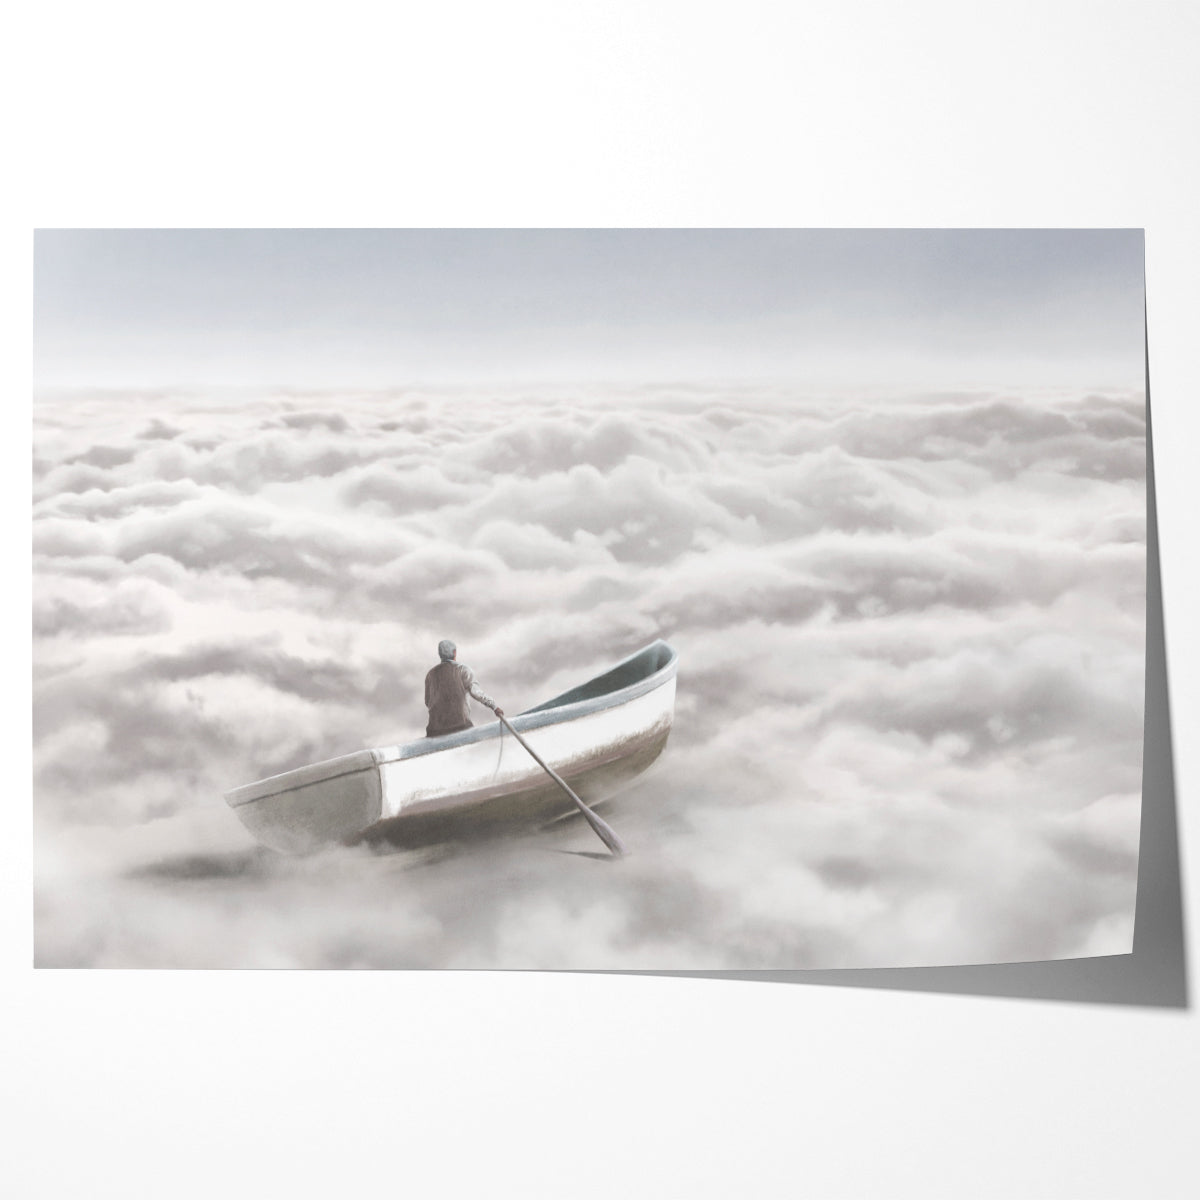 Man in Boat Floating on Sea Surreal Art Poster Wall Decor-Horizontal Posters NOT FRAMED-CetArt-10″x8″ inches-CetArt